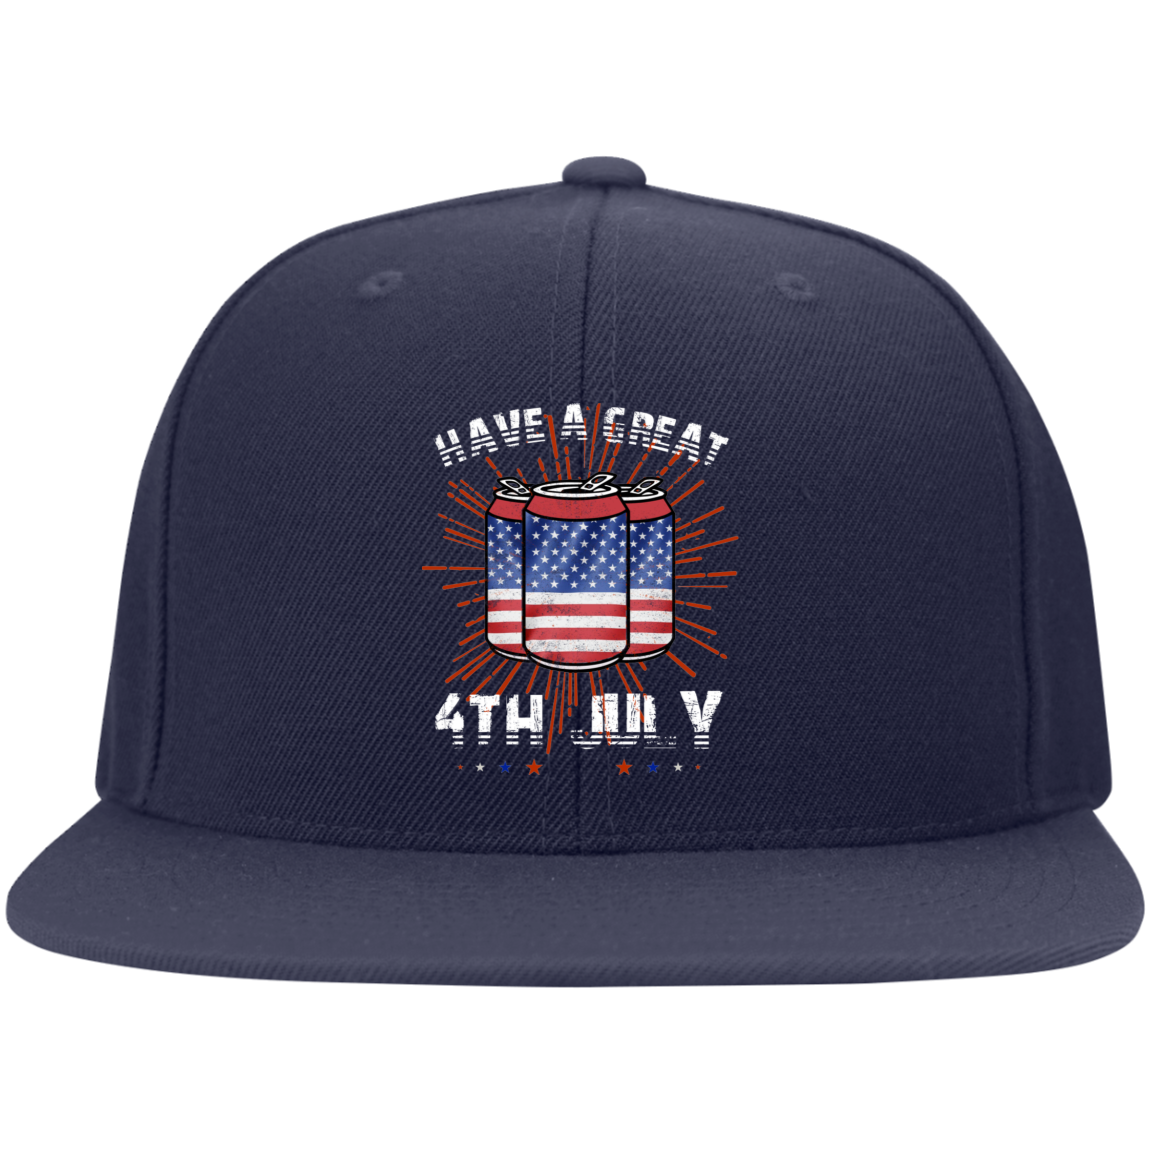 HAVE A GREAT 4TH CAN Embroidered Flat Bill Twill Flexfit Cap